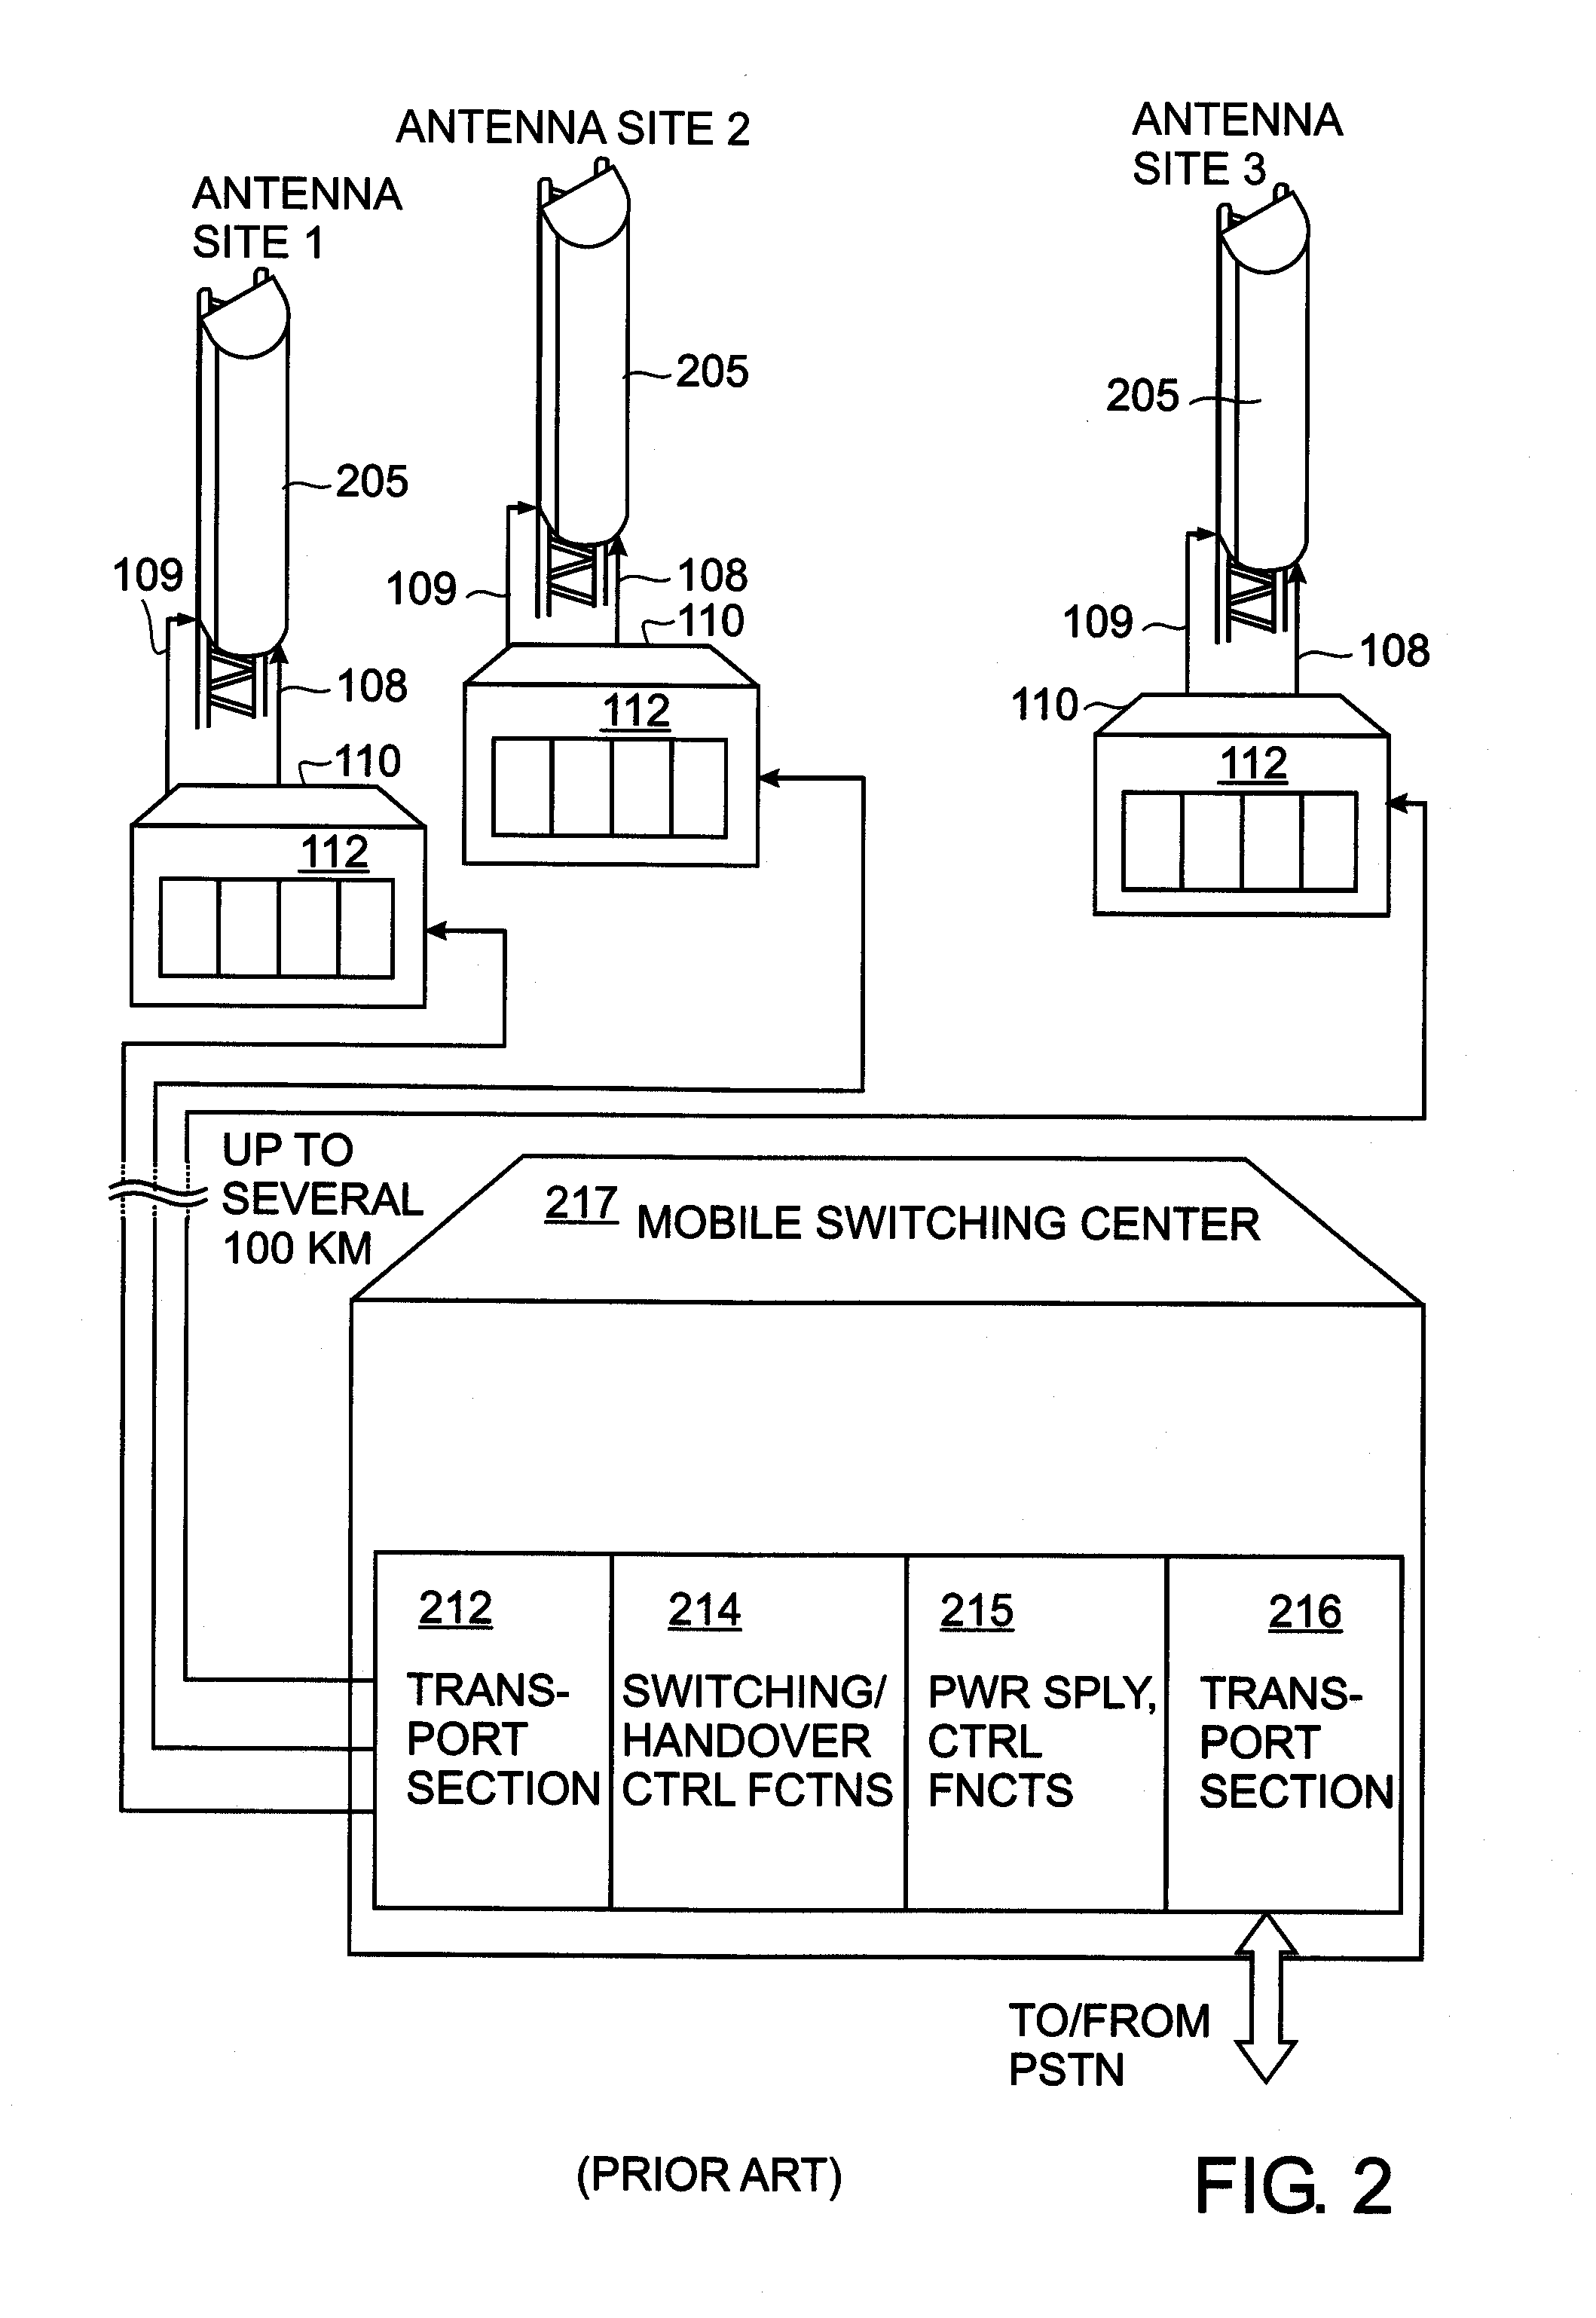 Remotely located radio transceiver for mobile communications network